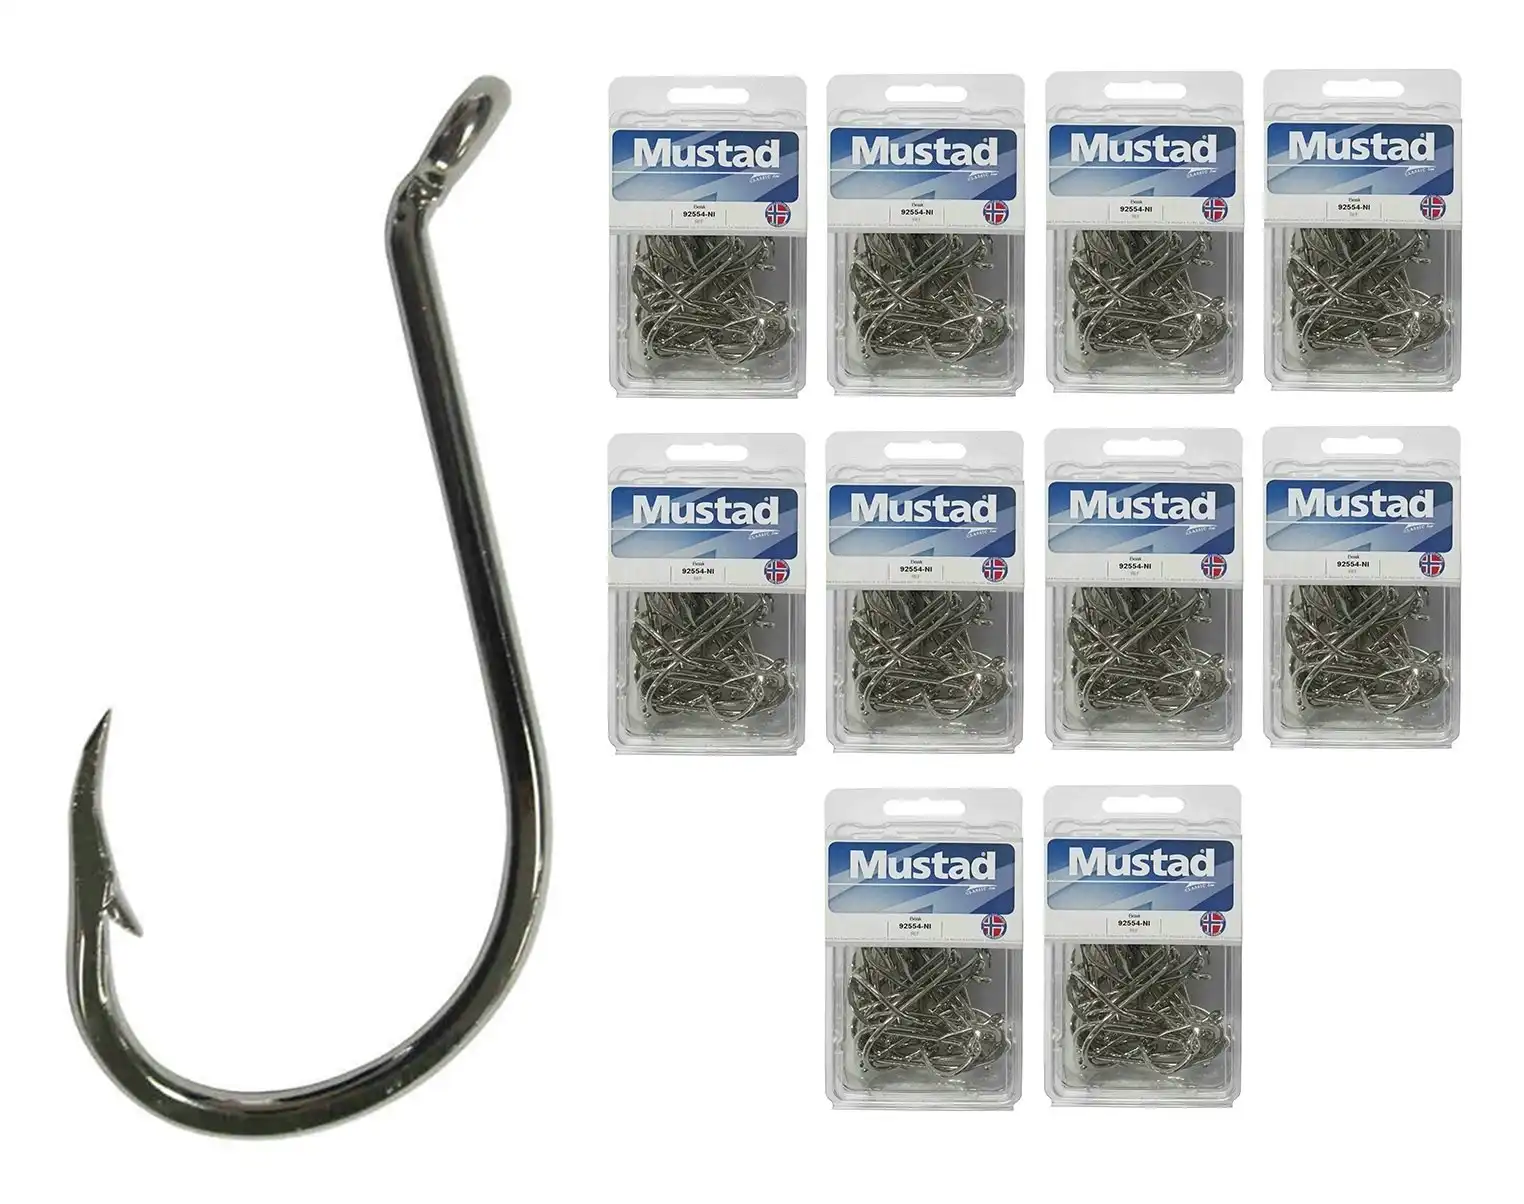 10 Boxes of Mustad 92554 2x Strong Nickle Plated Octopus Fishing Hooks, Hooked Online